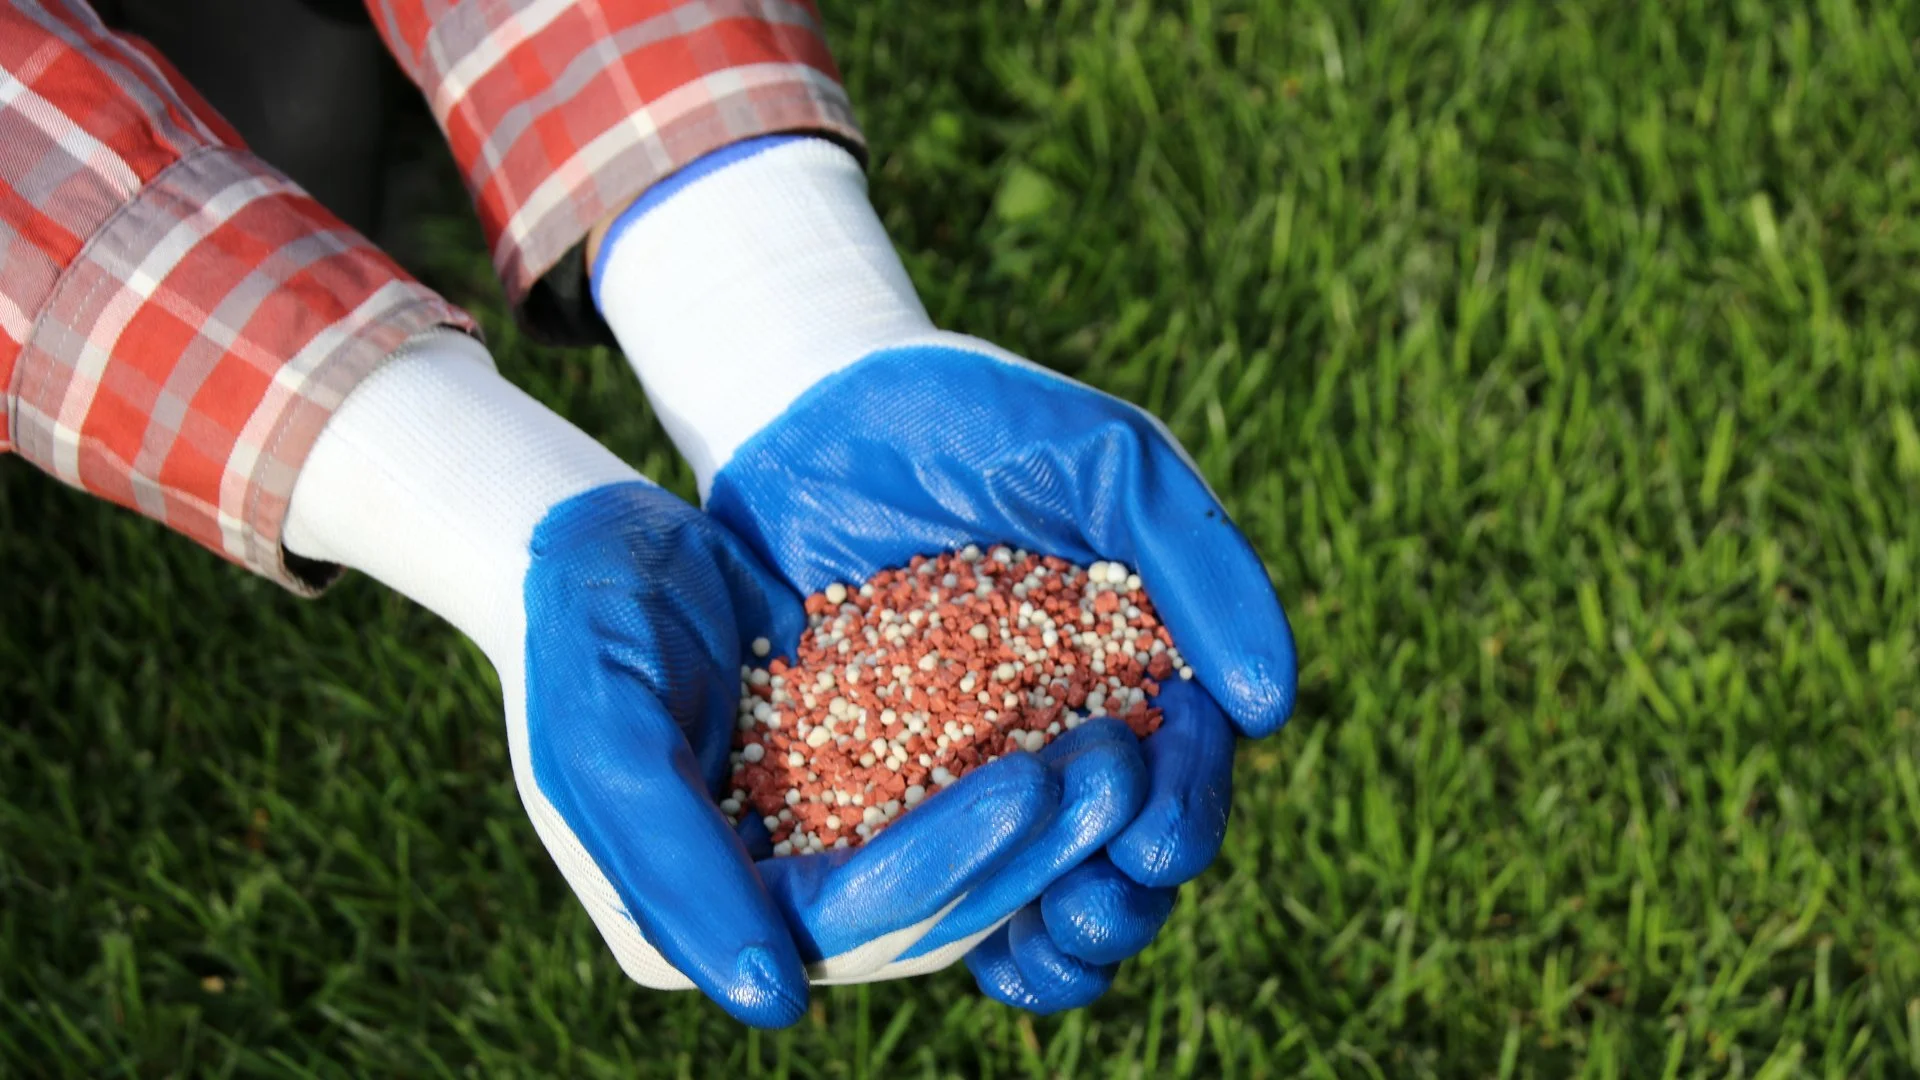 What Lawn Care Services Will Help My Lawn Recover From a Lawn Disease?